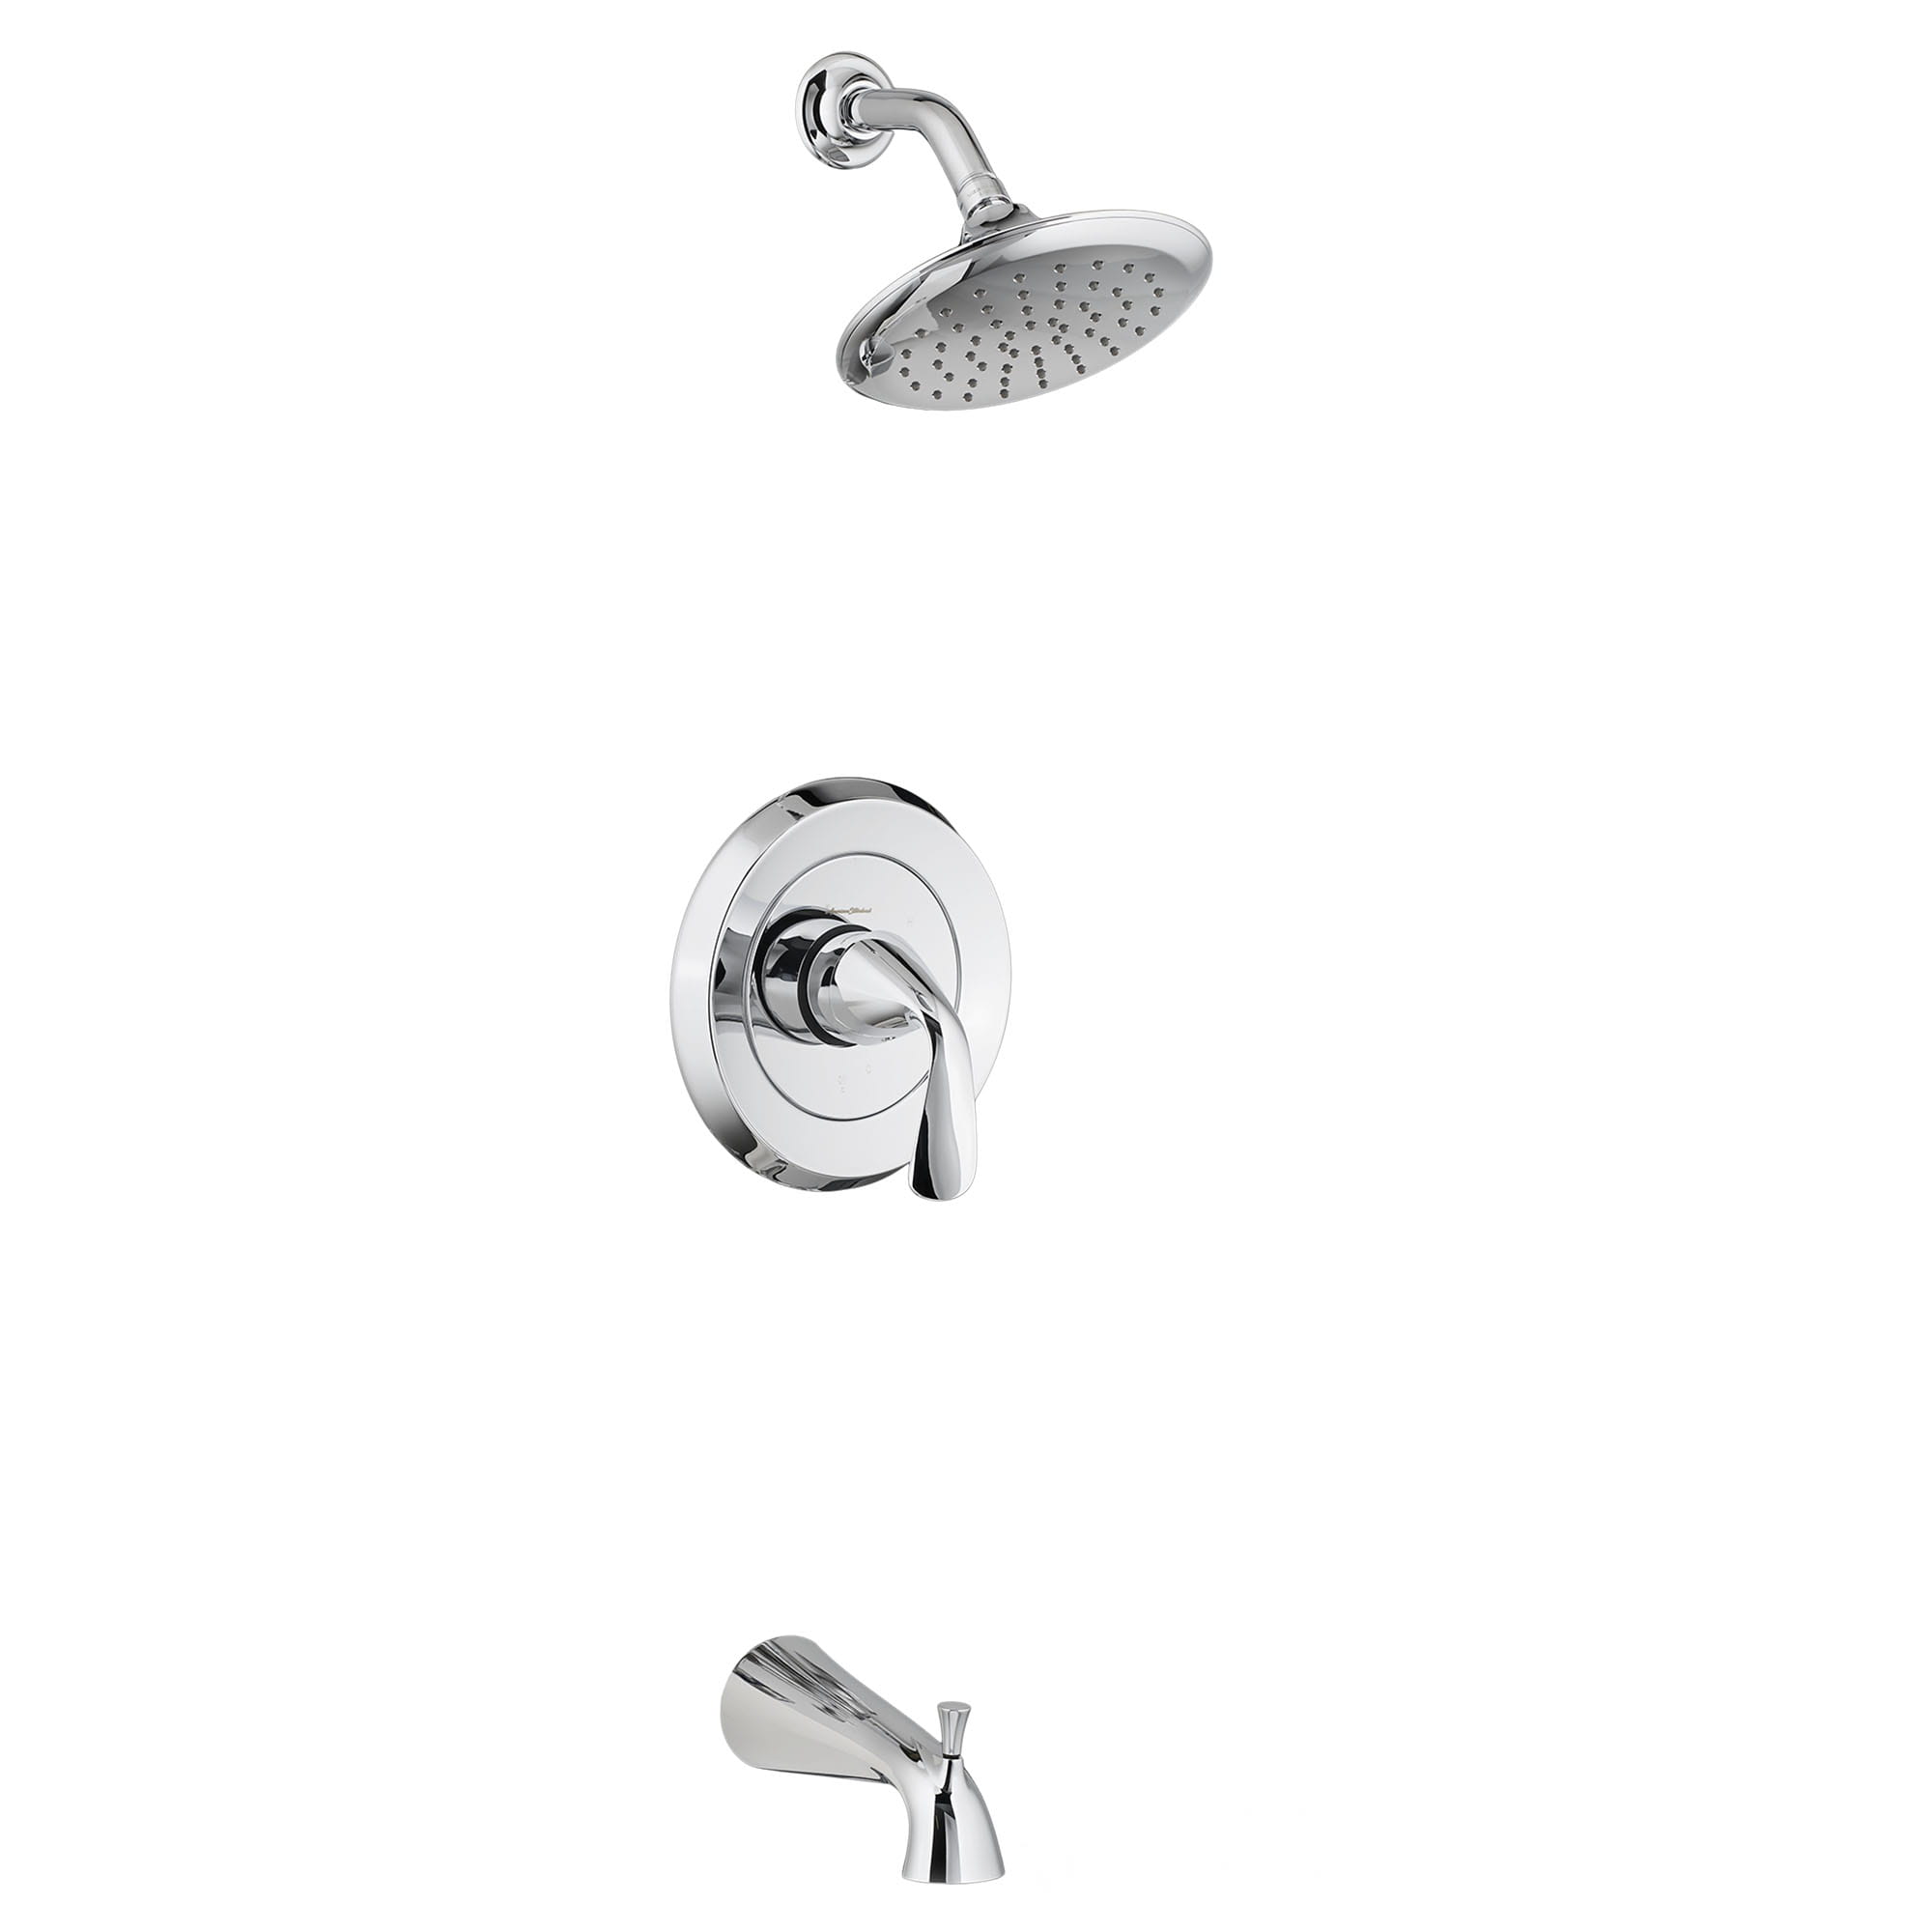 Fluent 25 gpm 95 L min Tub and Shower Trim Kit With Showerhead Double Ceramic Pressure Balance Cartridge With Lever Handle CHROME